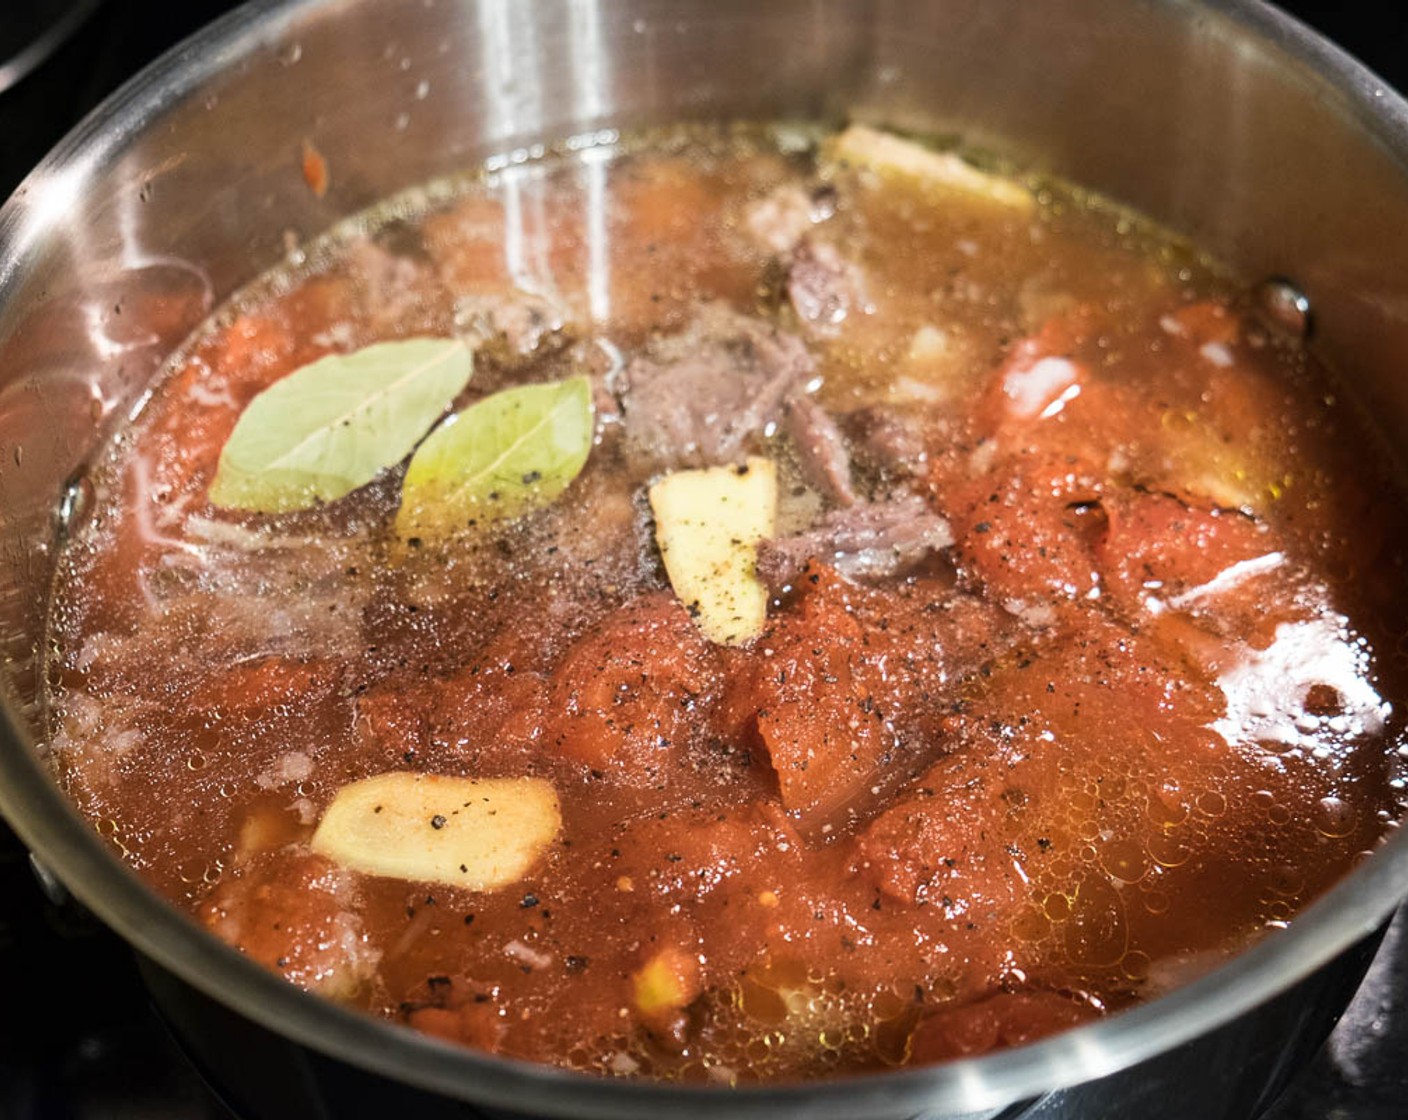 step 7 Transfer the beef broth and beef meat back to the big pot. Add Fresh Ginger (2 in), Yukon Gold Potatoes (4), Green Cabbage (1/4 head), Canned Diced Tomatoes (3 1/2 cups), Tomato Paste (2 Tbsp), Bay Leaves (3), Granulated Sugar (1/2 Tbsp), and 
Ground Black Pepper (1/2 tsp).